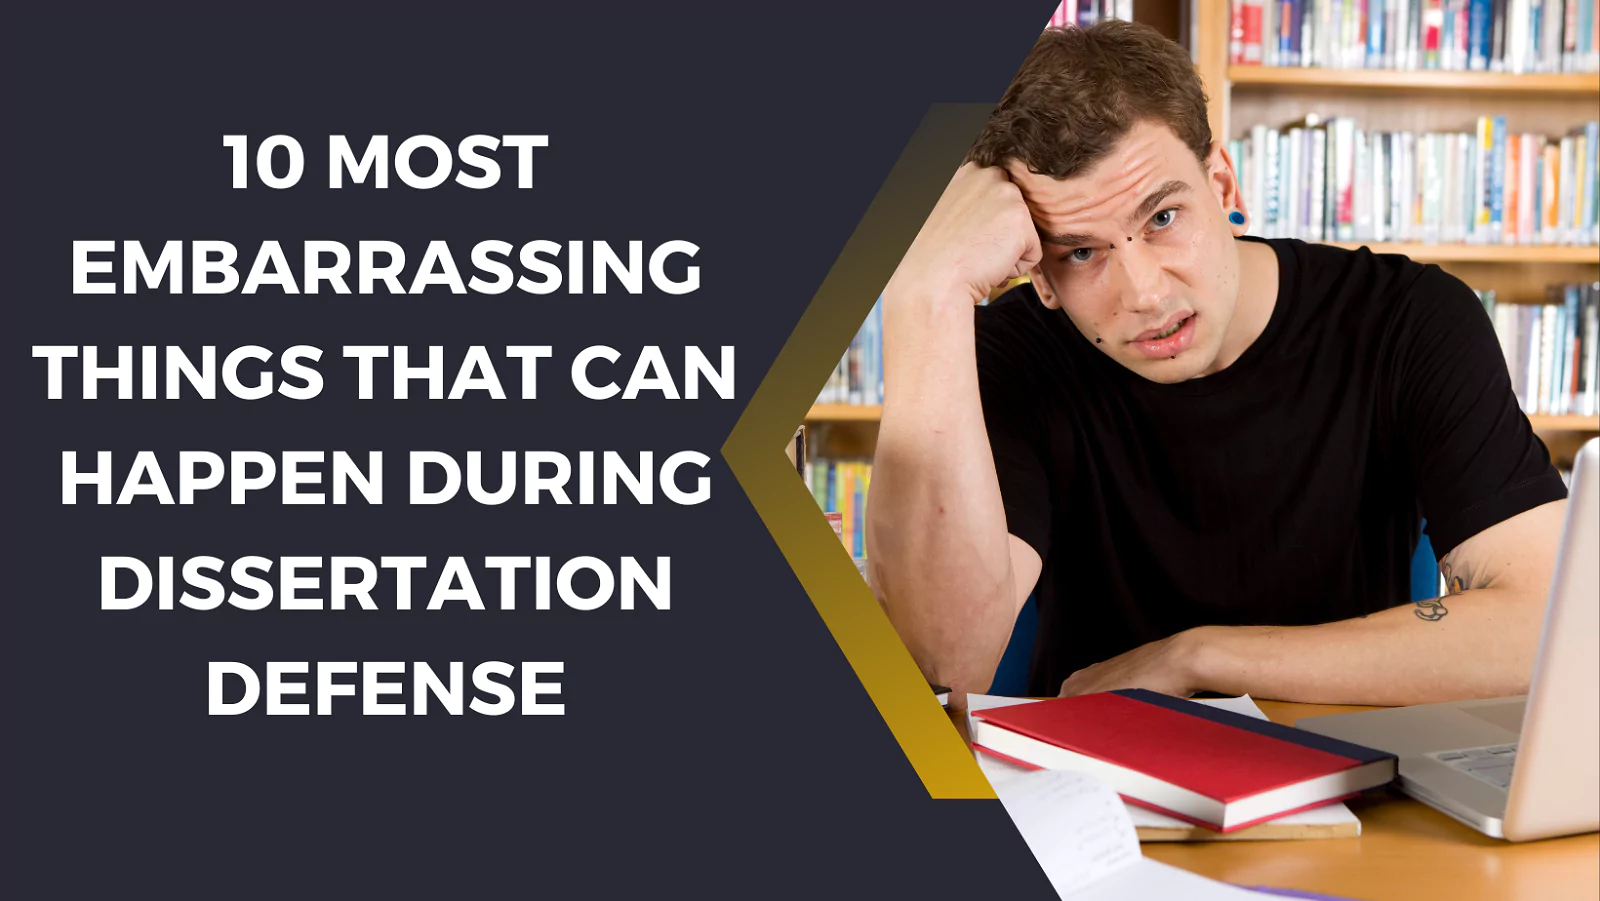 10 Most Embarrassing Things That Can Happen During Dissertation Defense